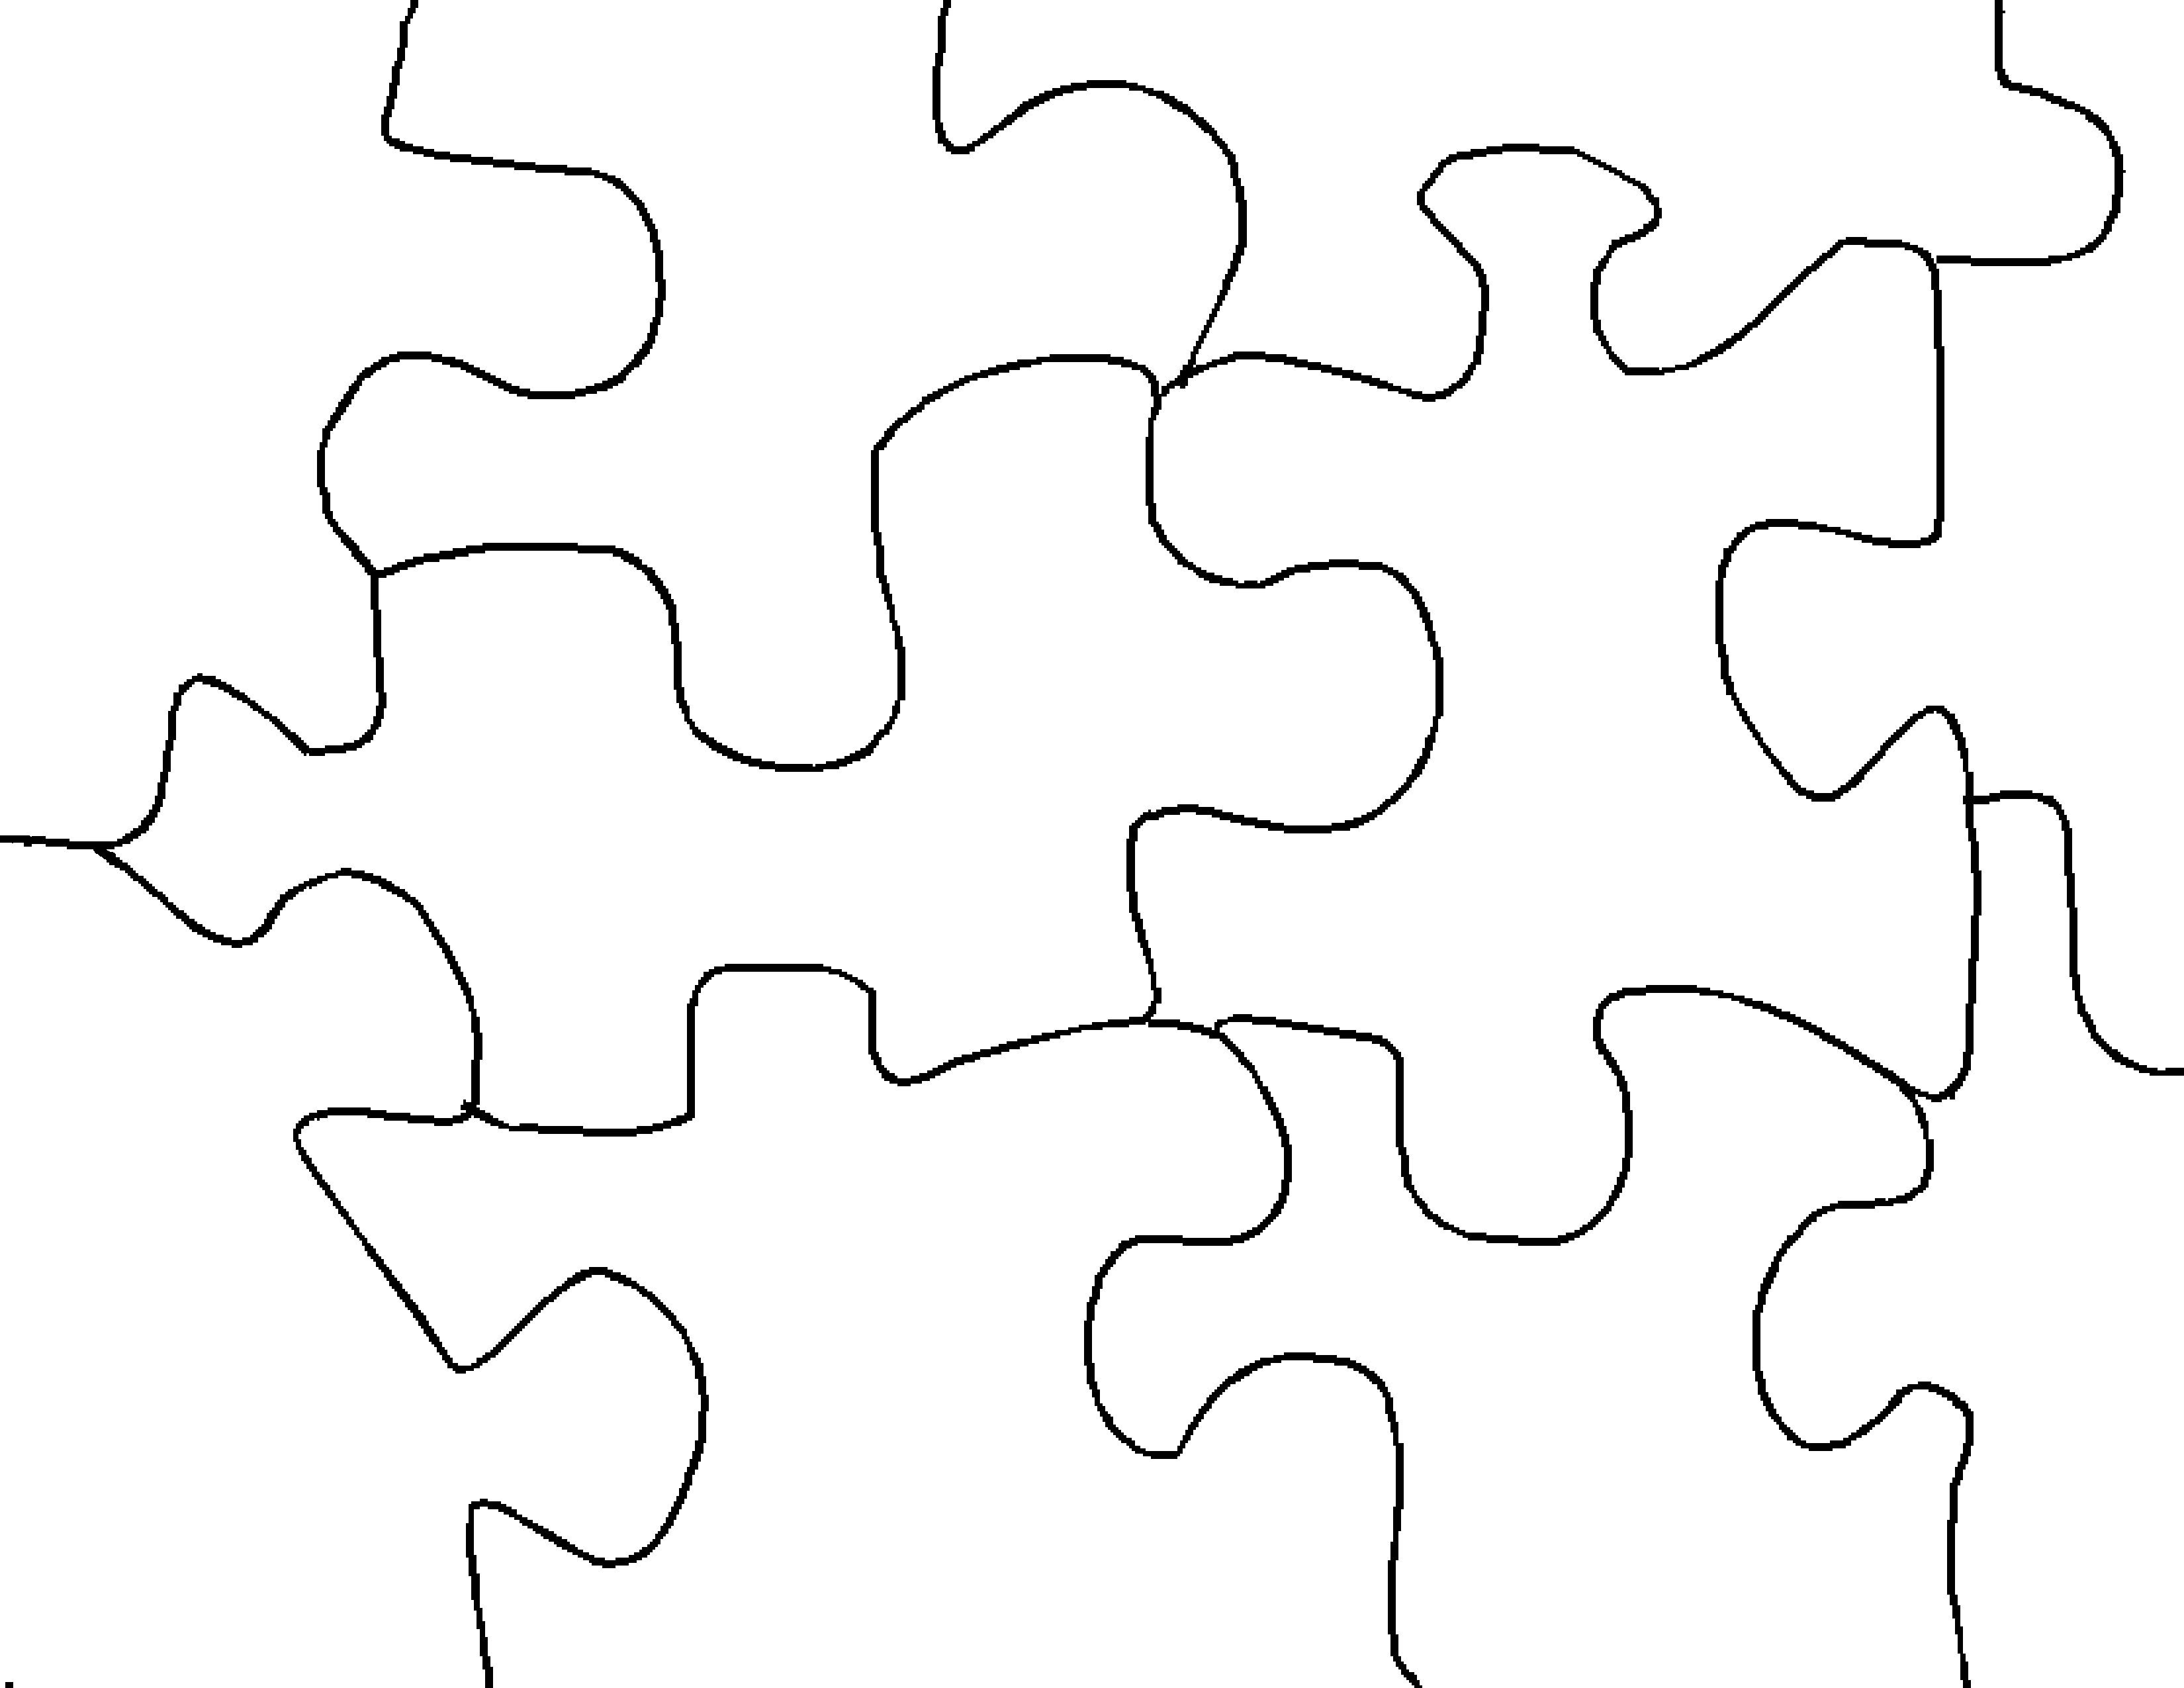 Make Jigsaw Puzzle - Jigsaw Puzzle Maker Free Online Printable